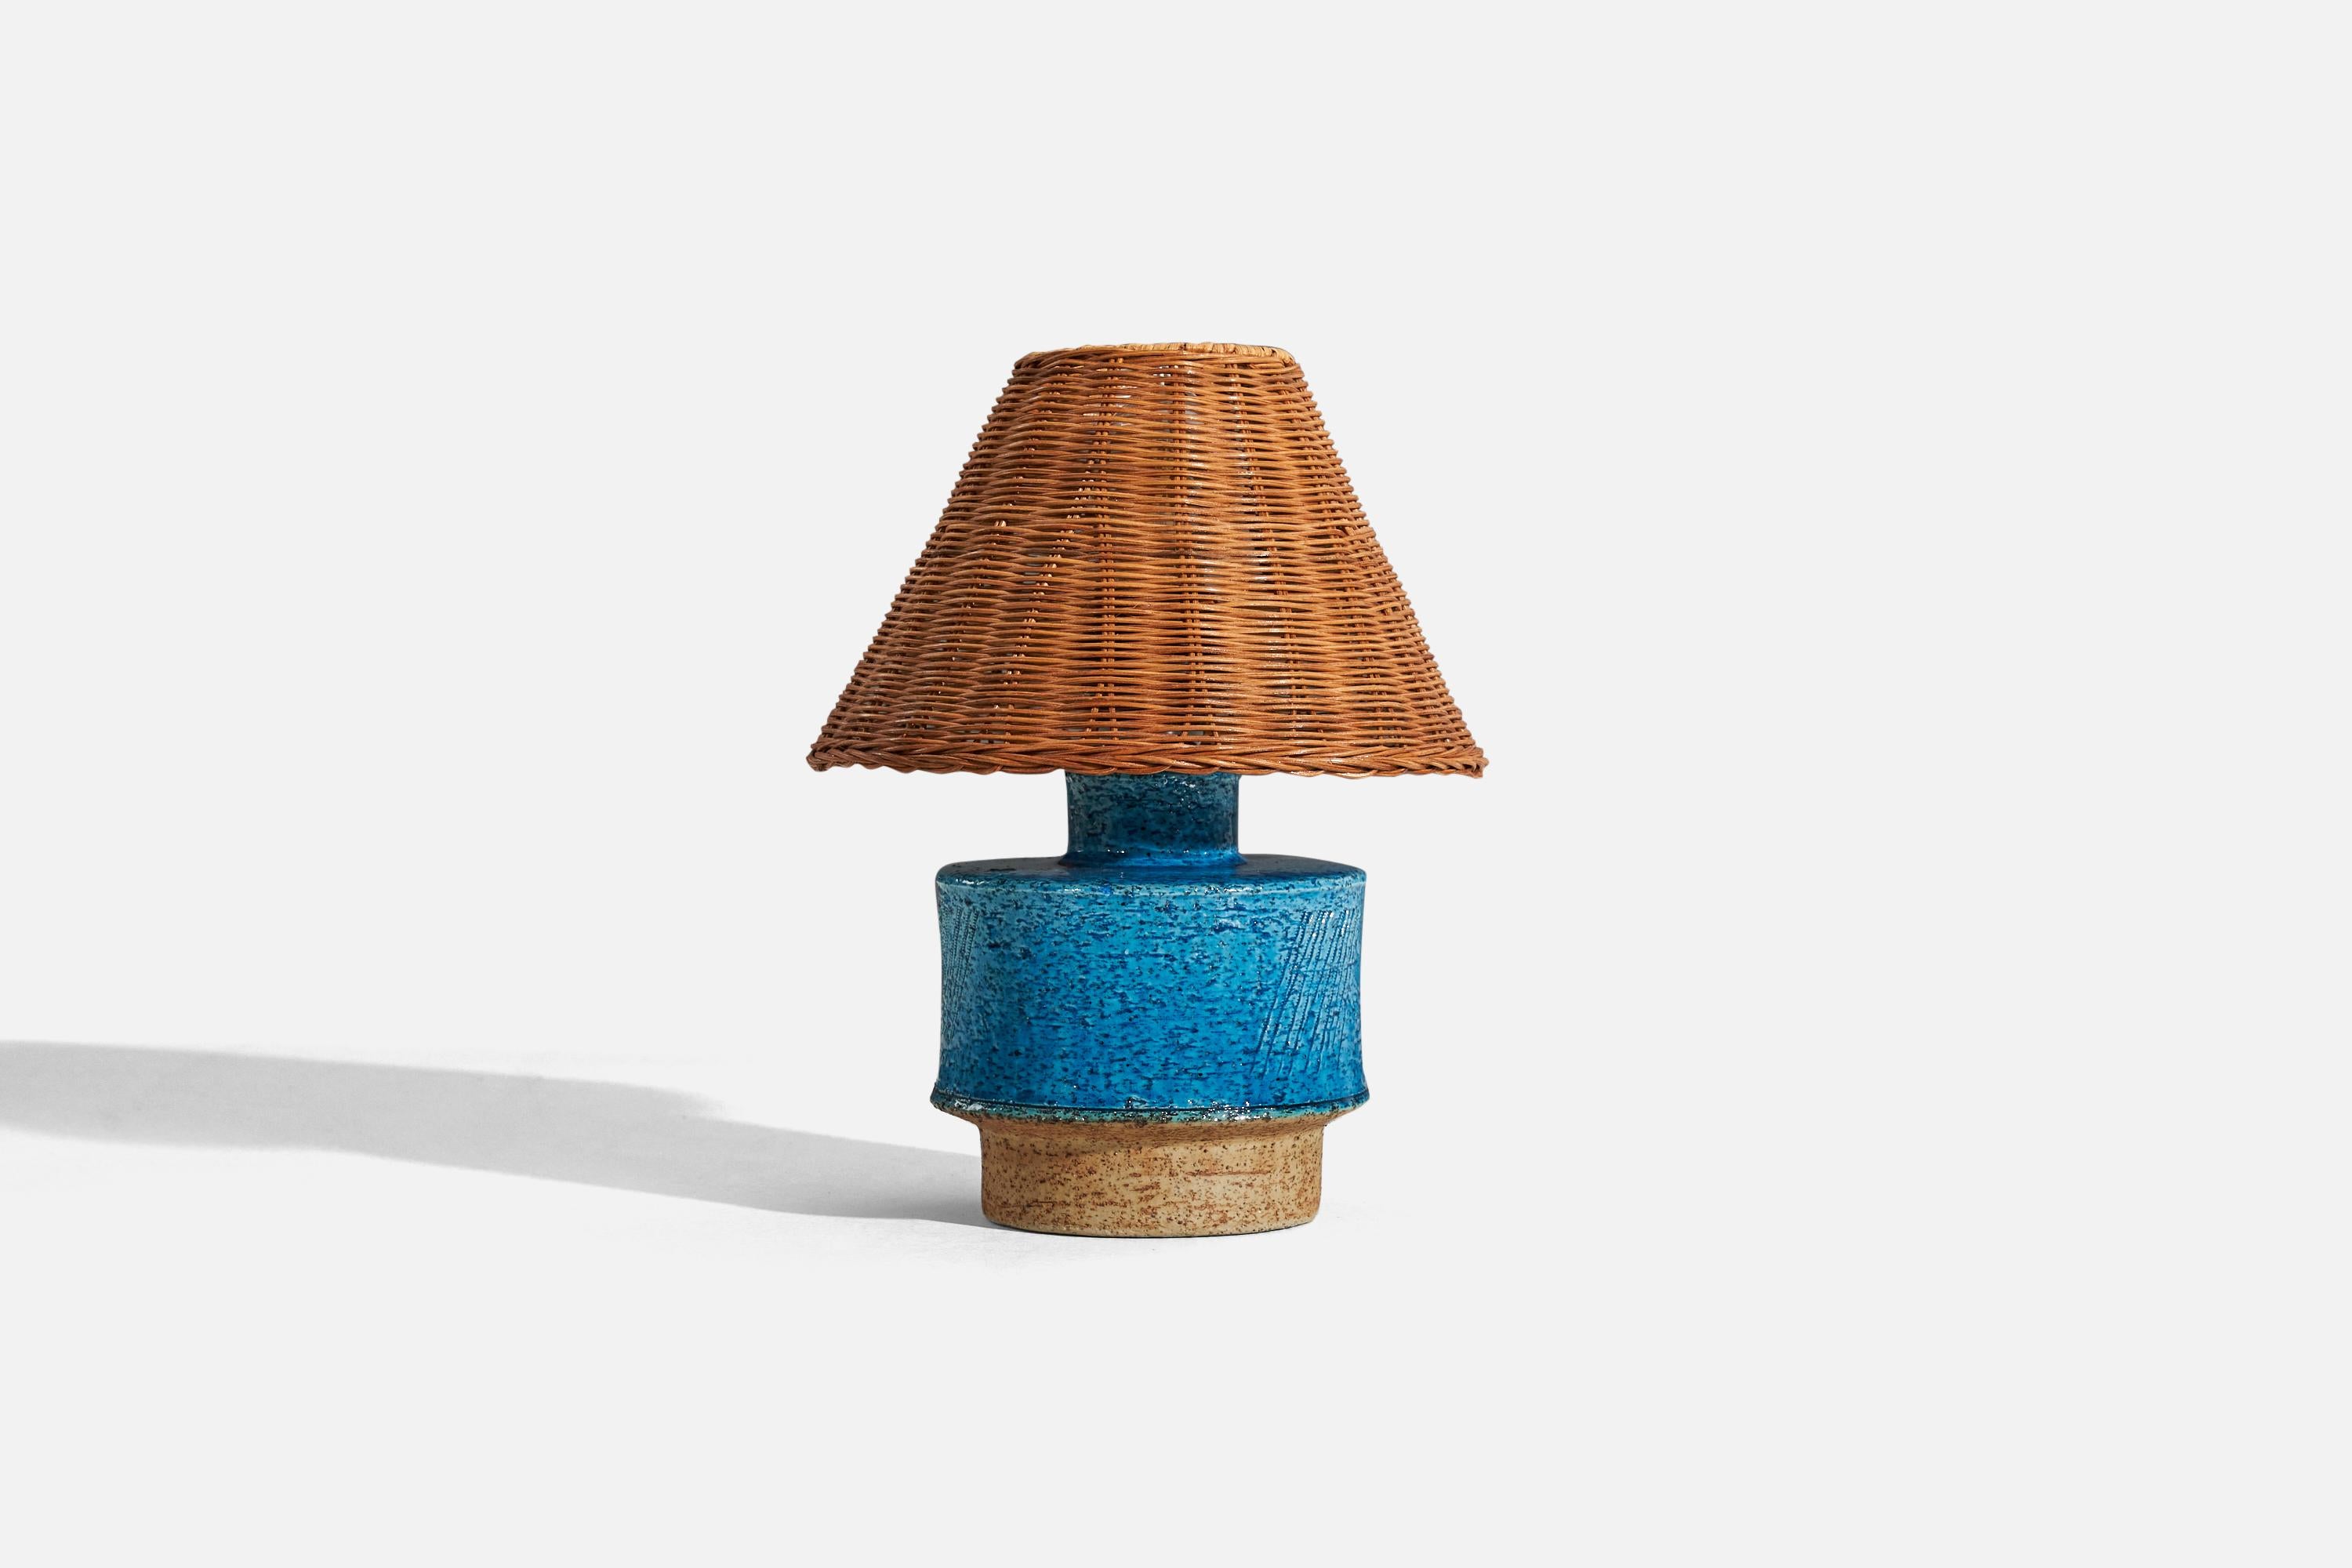 A blue, glazed stoneware table lamp designed by Inger Persson and produced by Rörstrand, Sweden, c. 1960s.

Sold without lampshade. 
Dimensions of Lamp (inches) : 7.75 x 5.25 x 5.25 (H x W x D)
Dimensions of Shade (inches) : 5.875 x 8.25 x 3.5